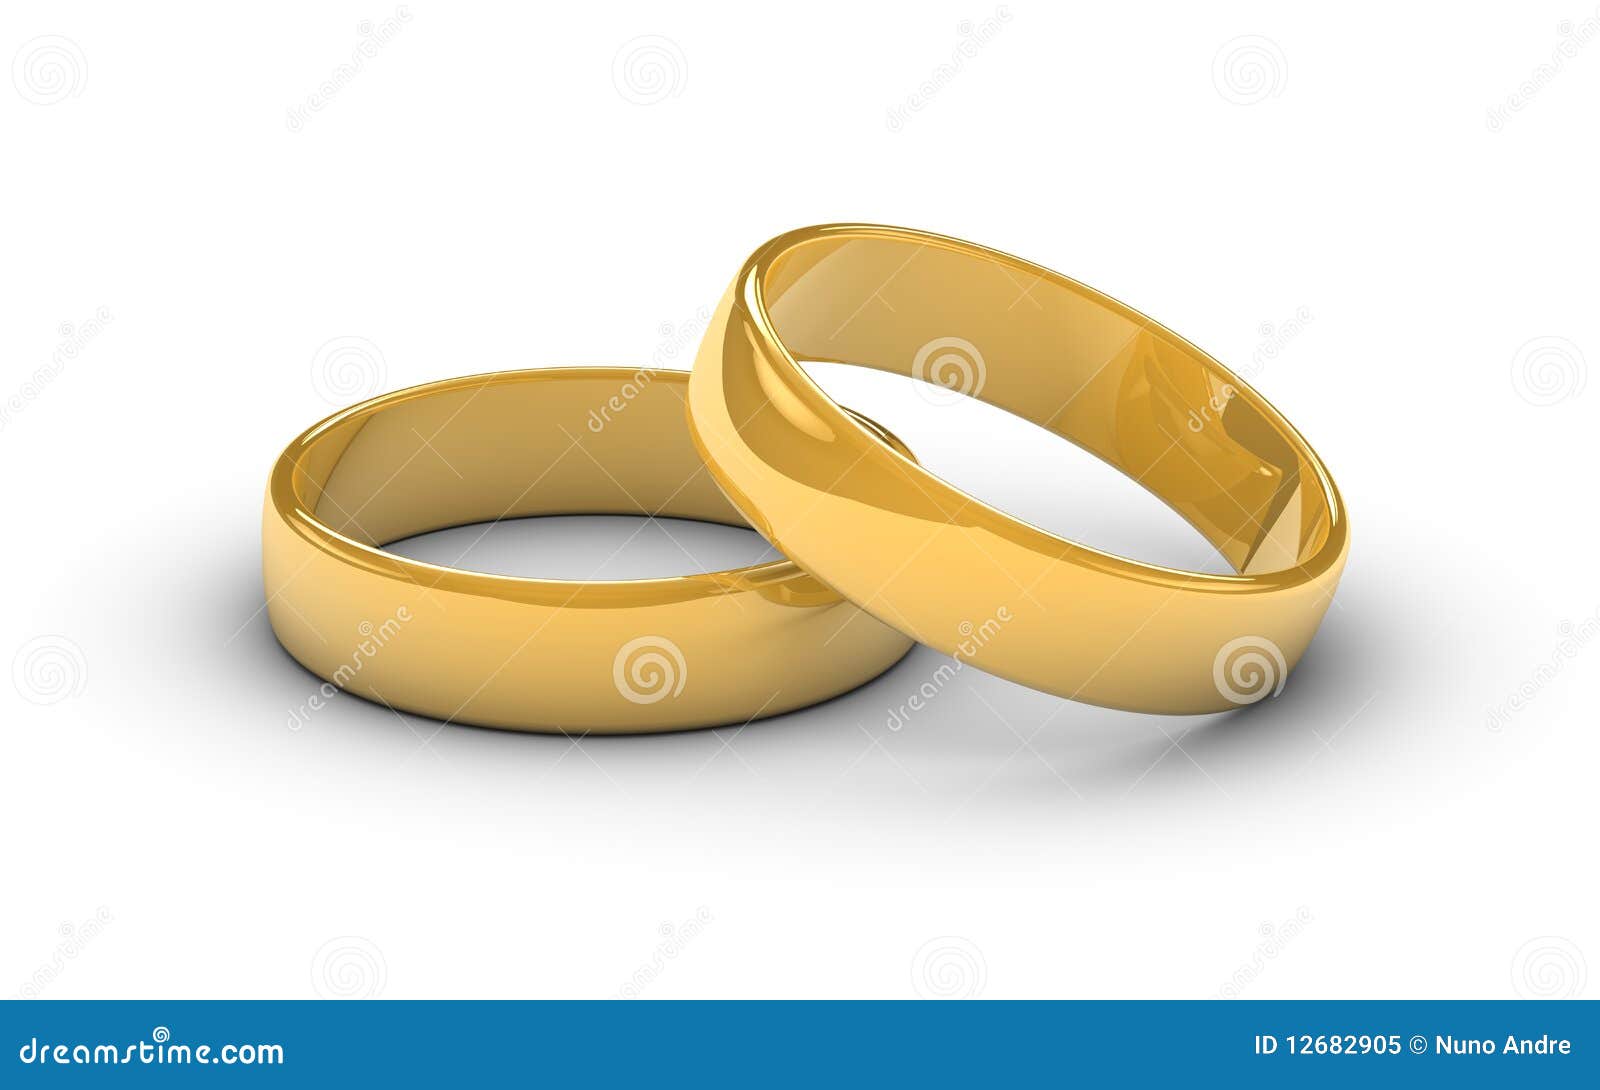 golden marriage rings